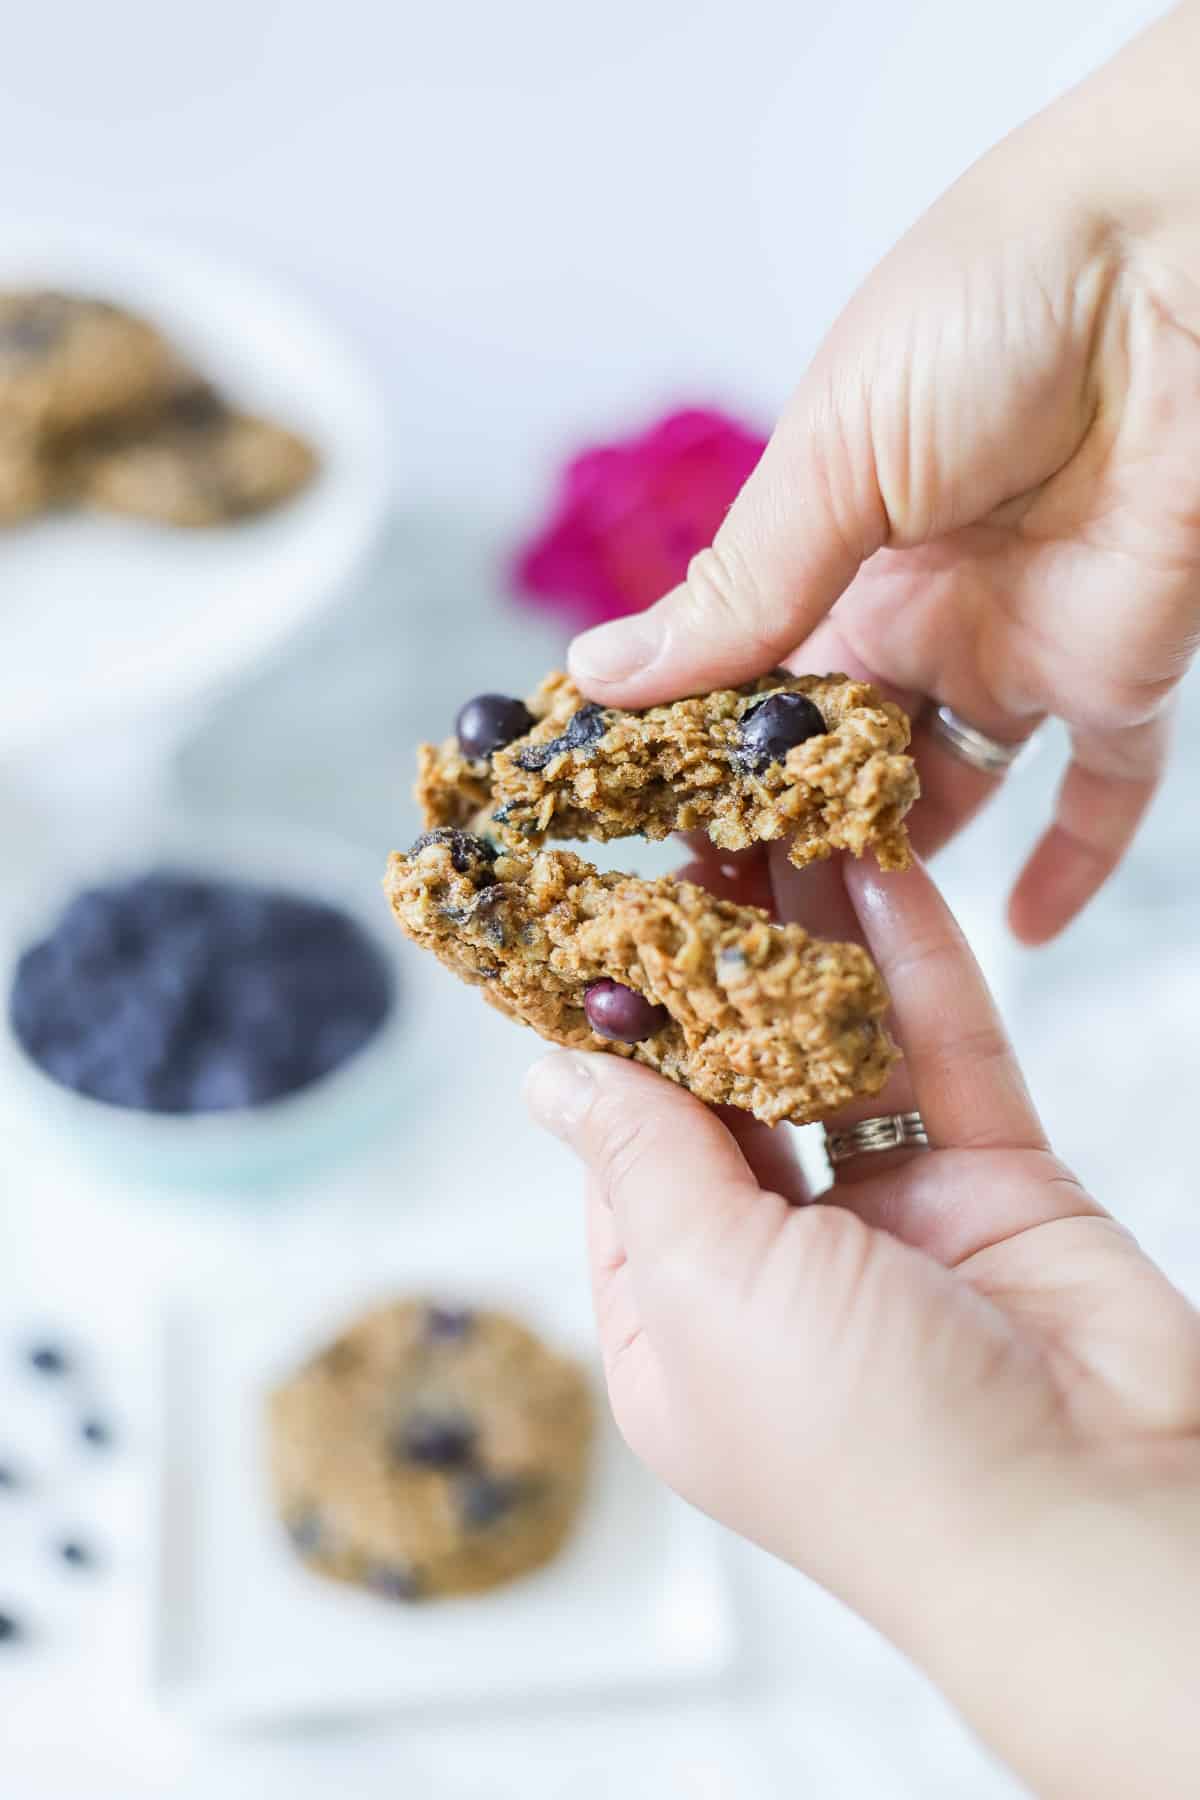 hands breaking a blueberry oatmeal cookie in half. Blueberries, flowers, and cookies in the background